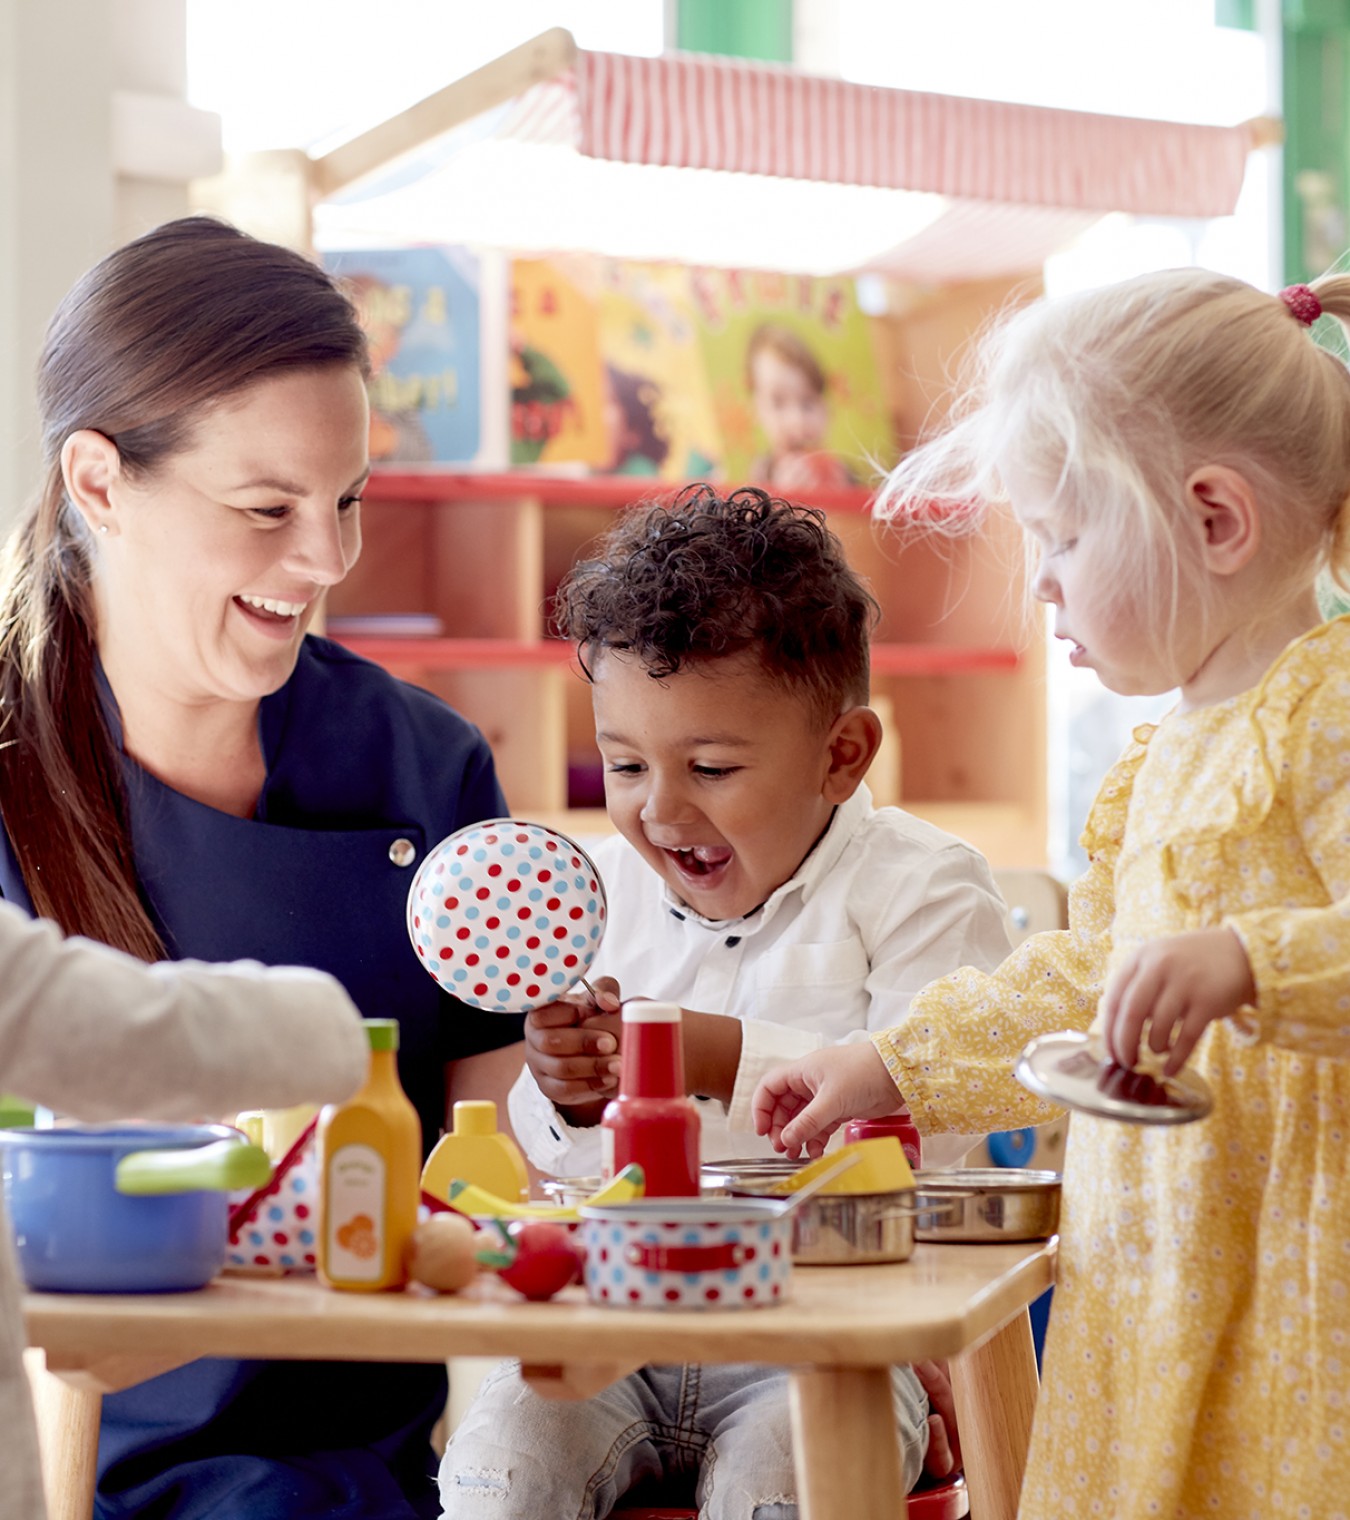 Working in Childcare - the benefits!